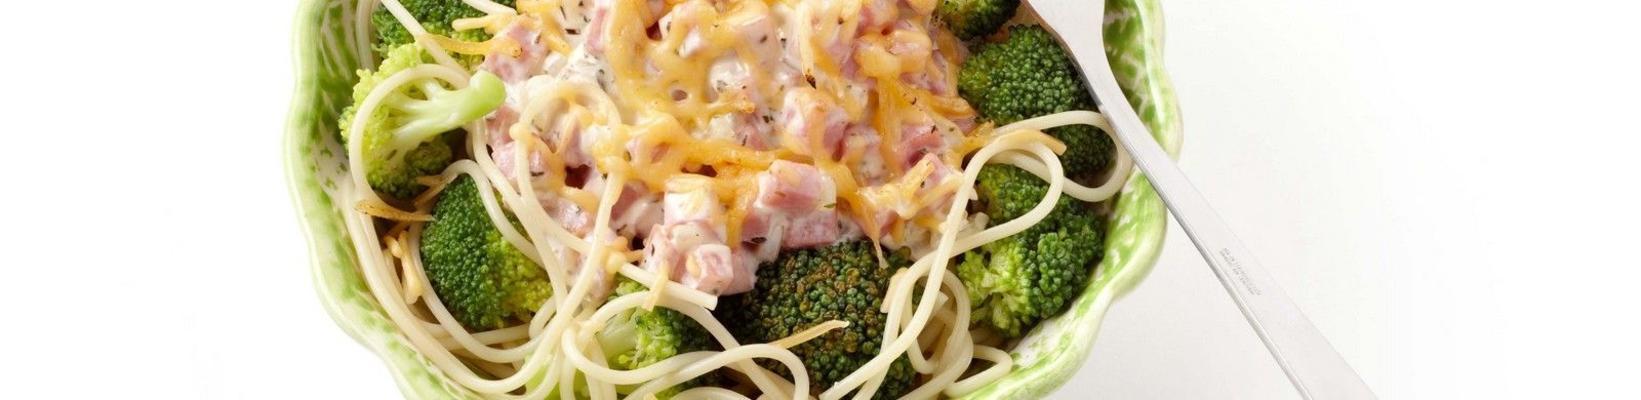 broccoli dish with ham and cheese